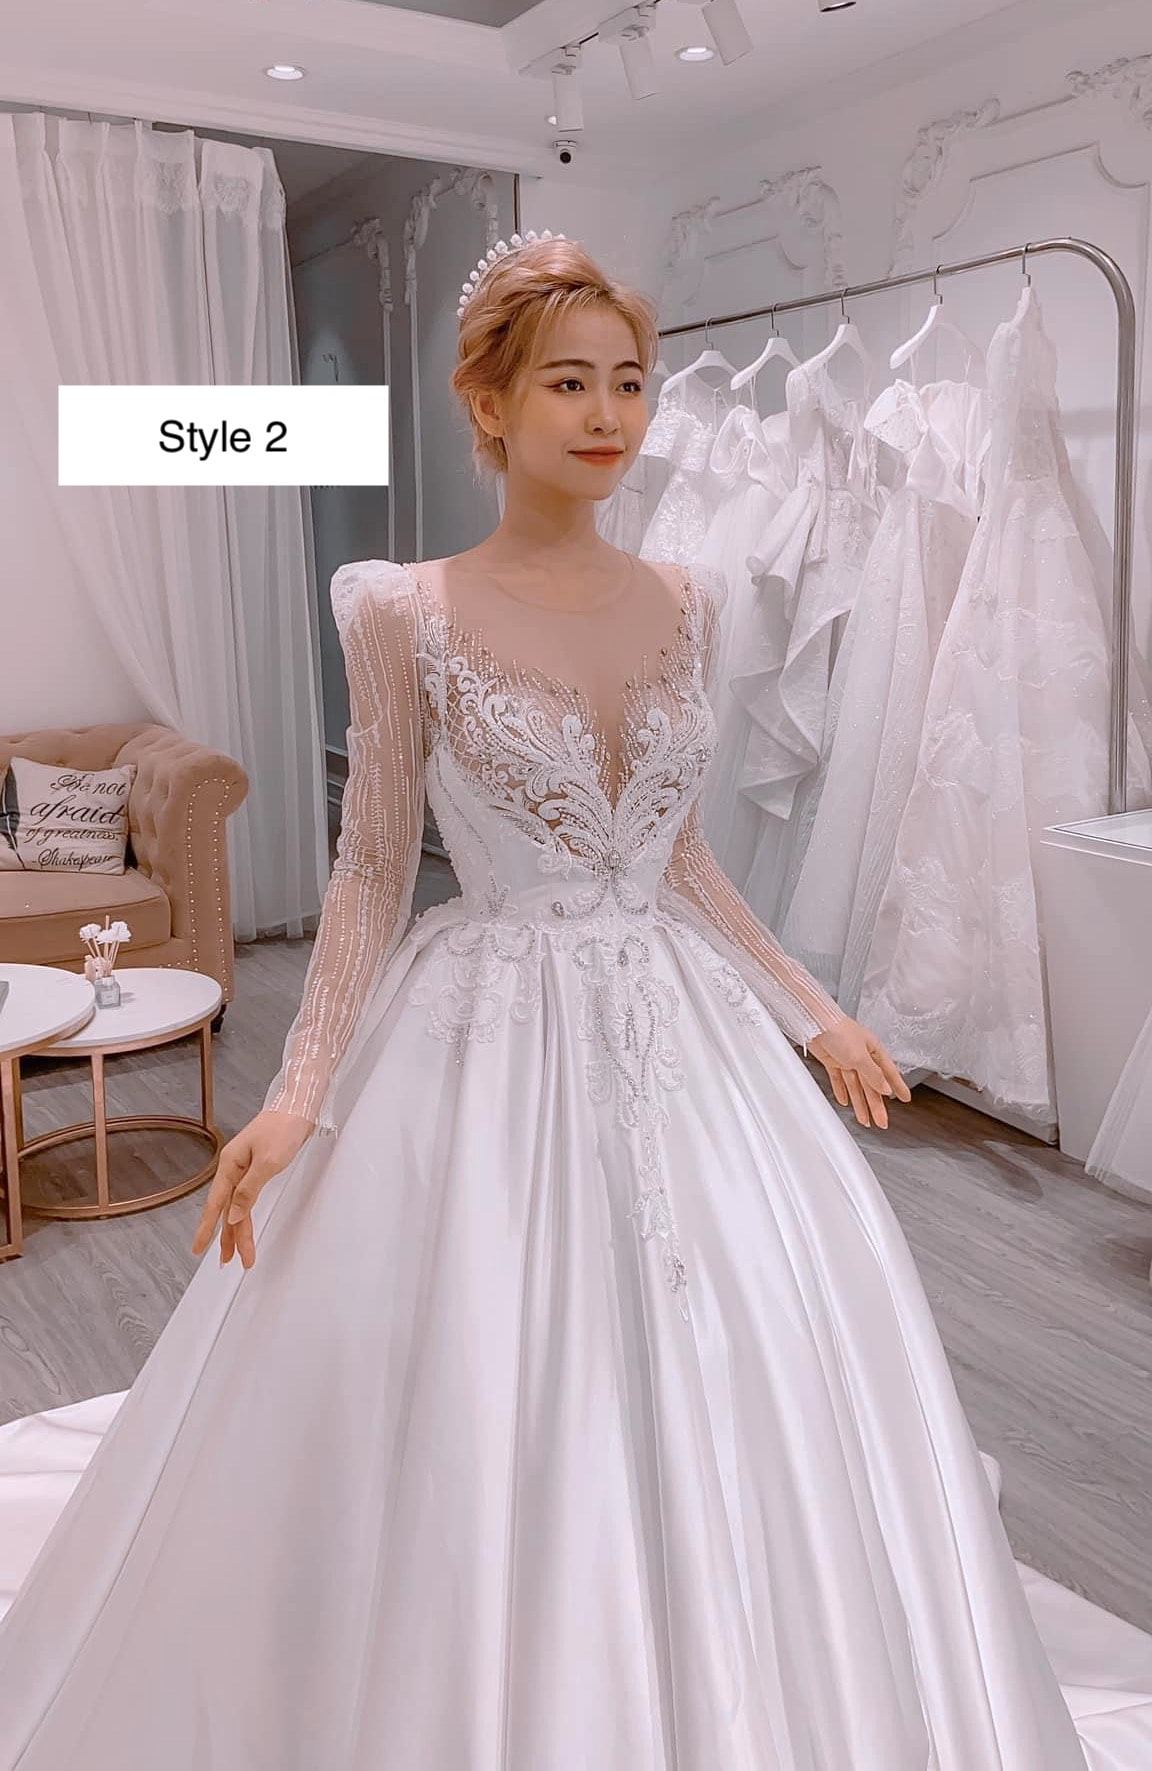 From traditional to playful white long sleeves satin ball gown wedding ...